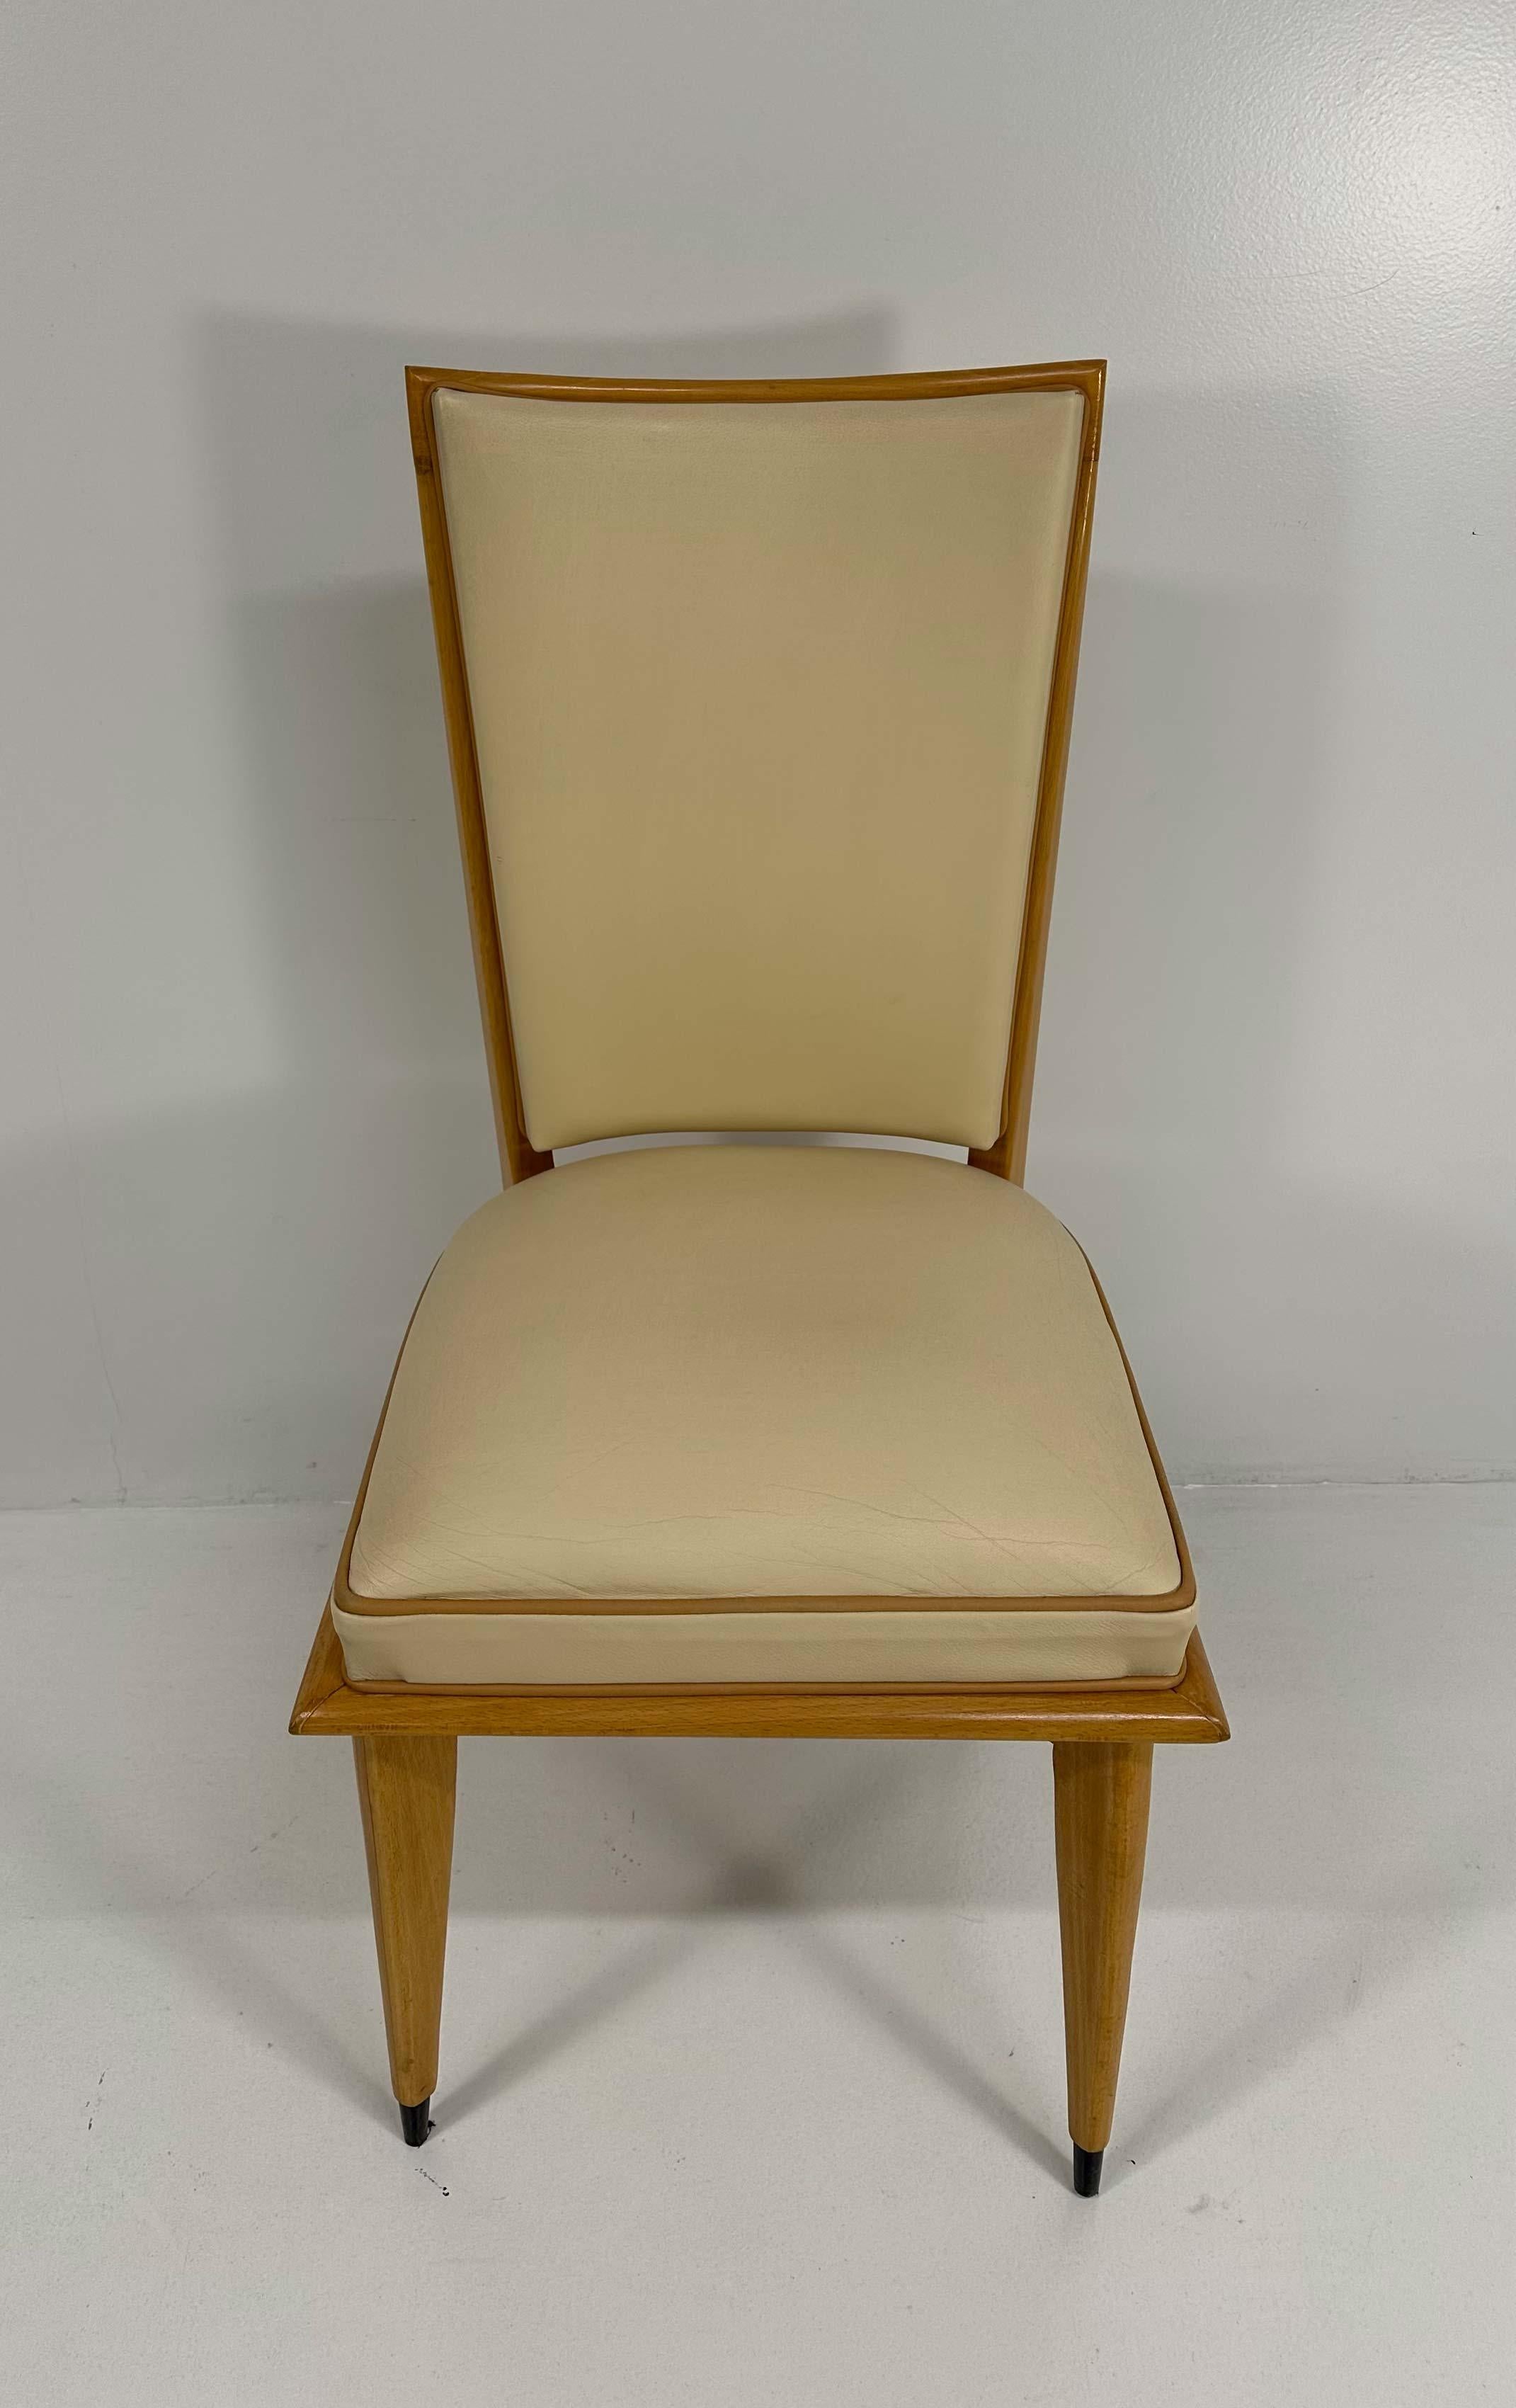 French Art Deco Set of 12 Chairs in Maple and Cream Leather, 1930s For Sale 2